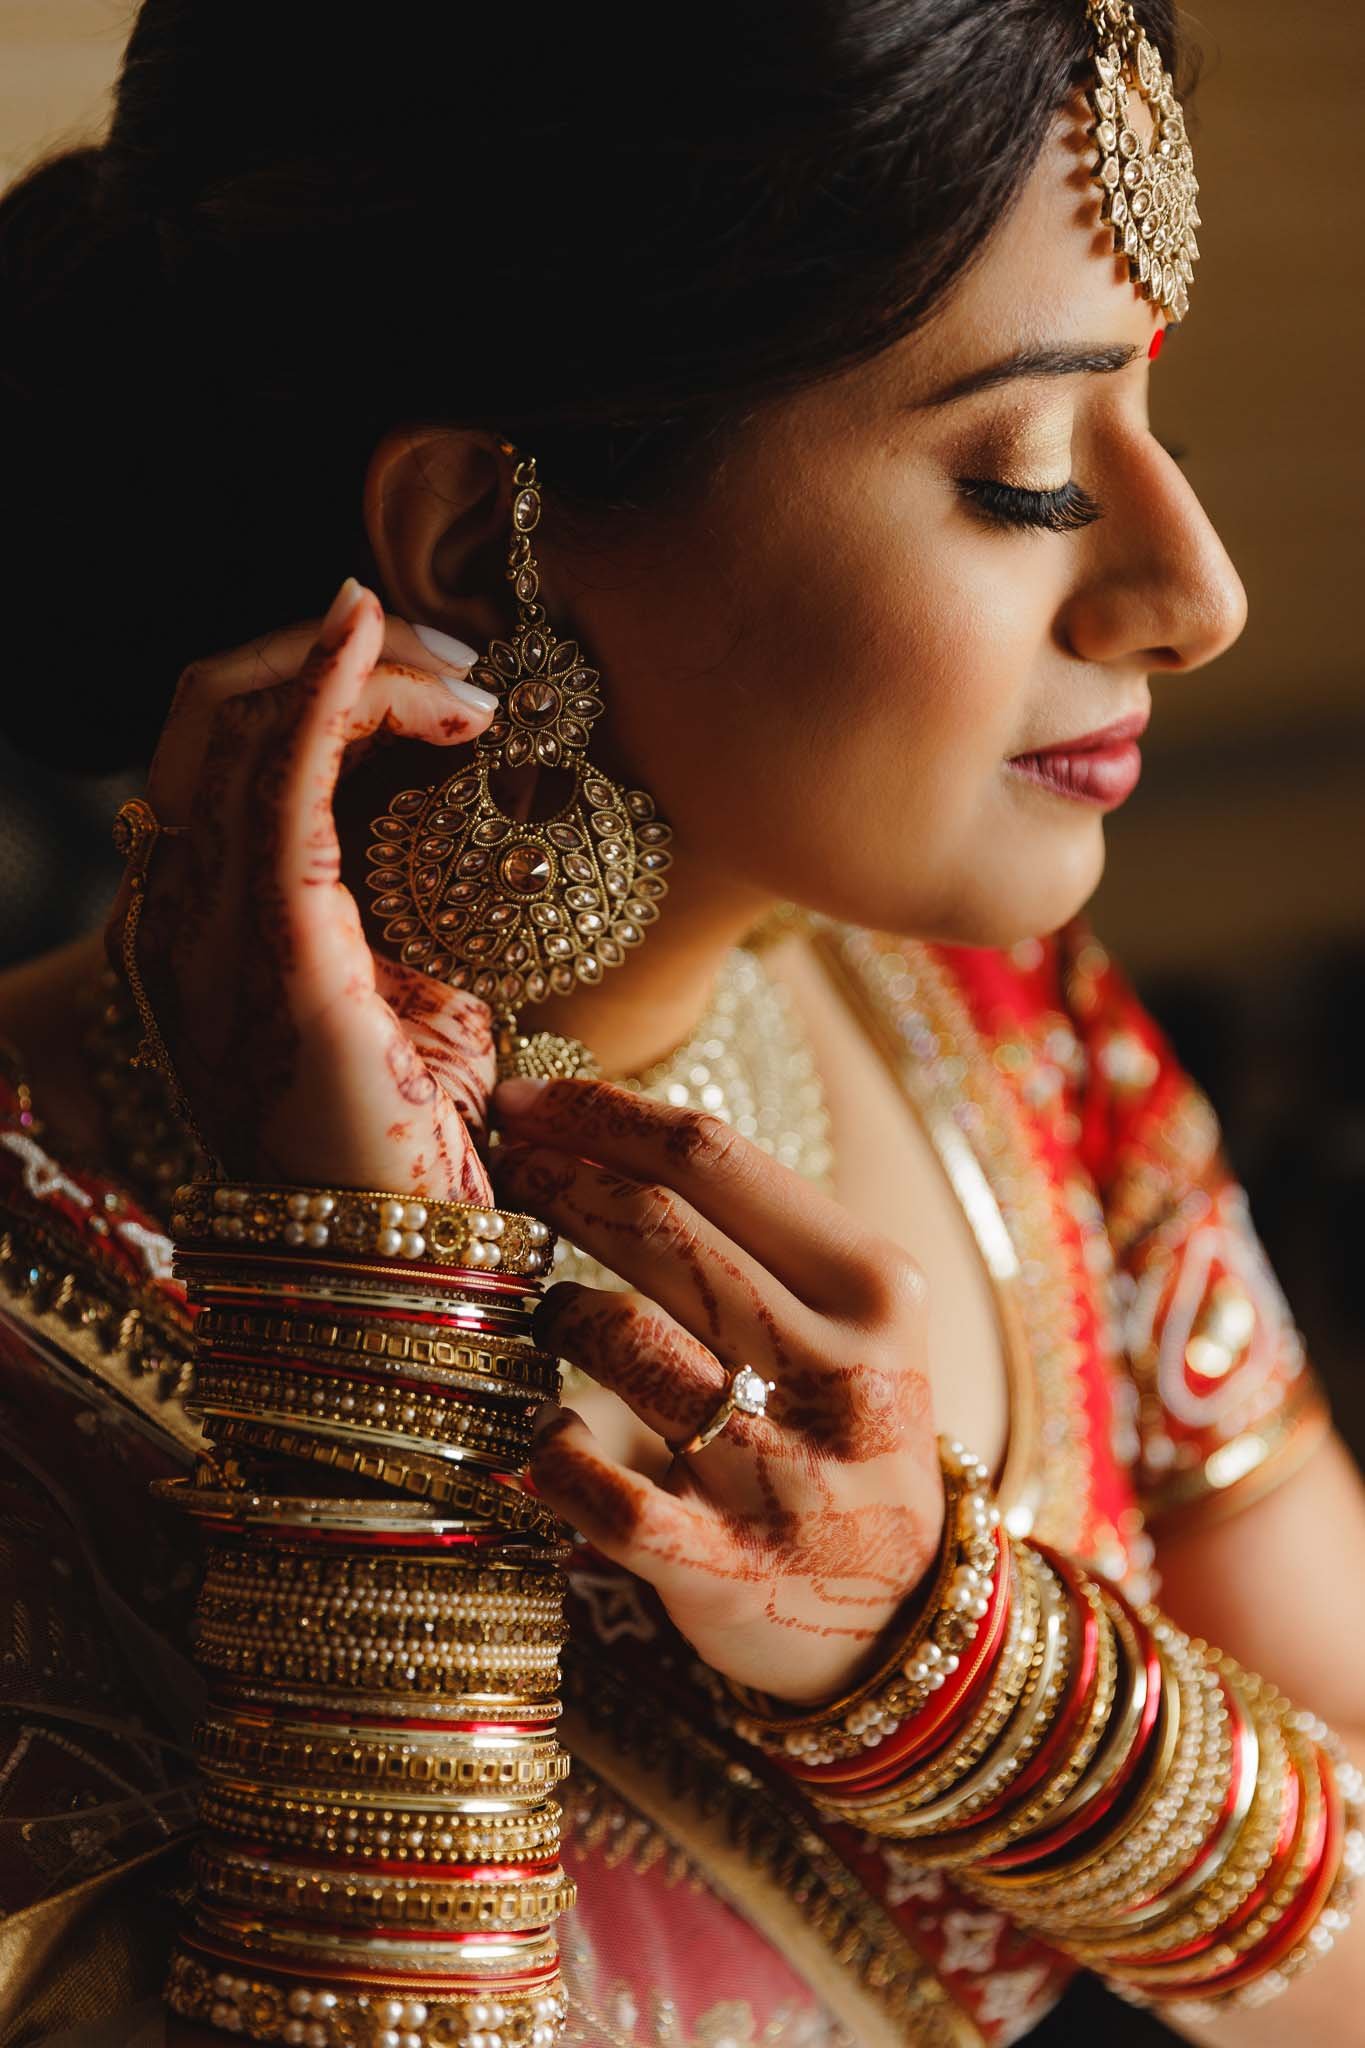  Artistic pose Idea for Indian bride getting ready session  